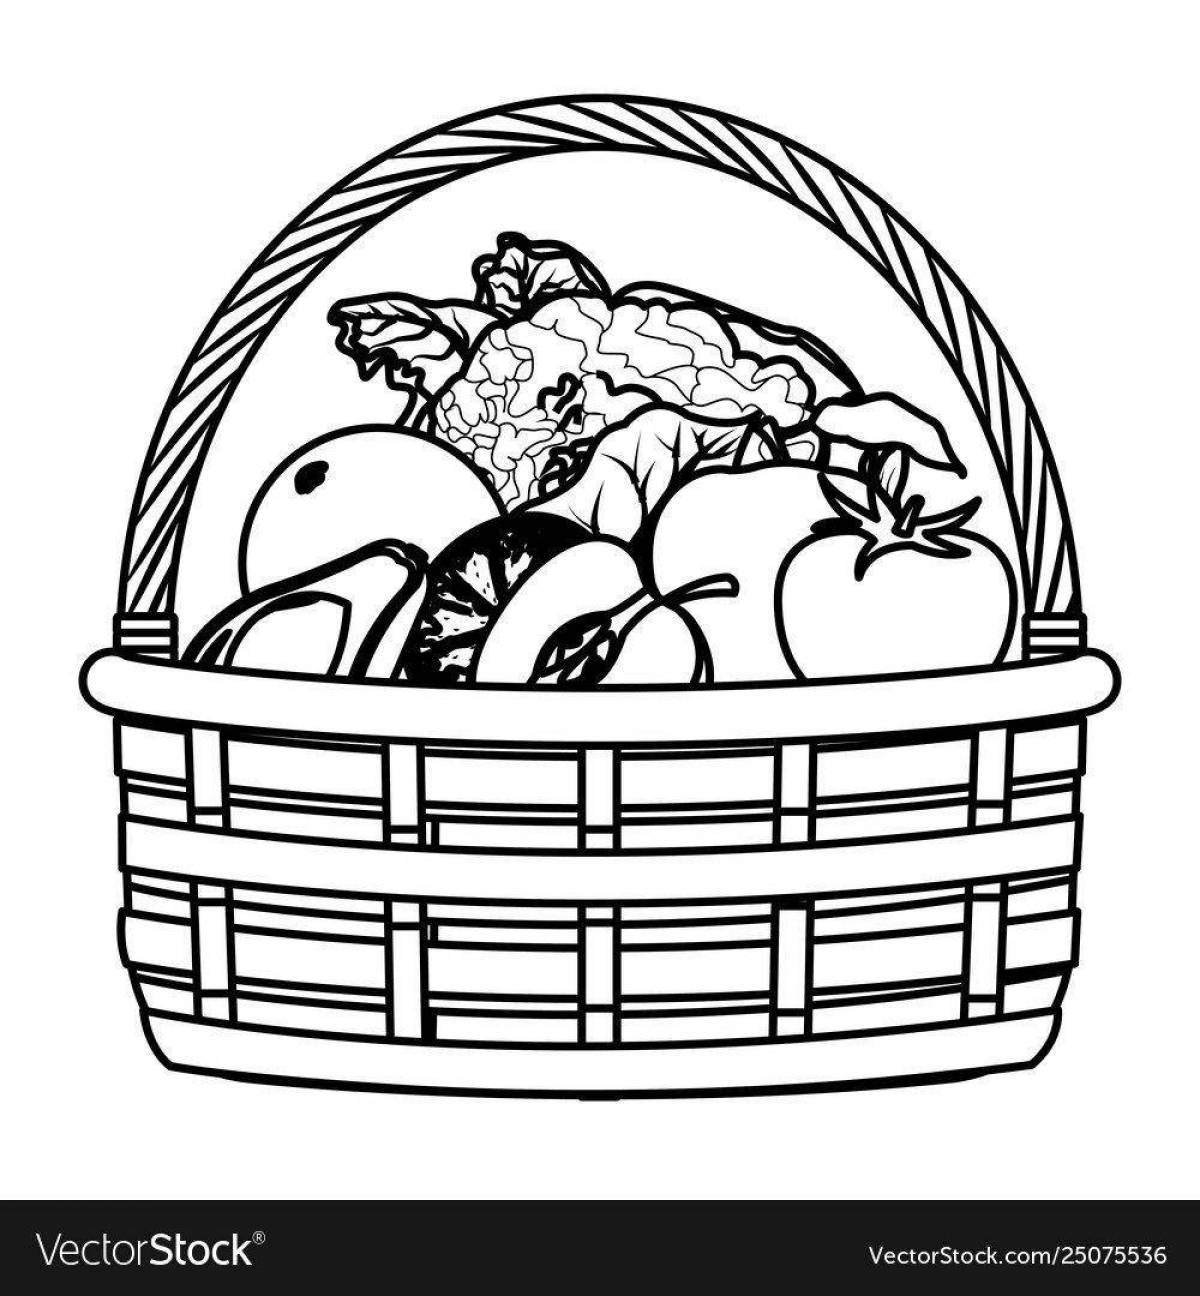 Appetizing fruits and vegetables in a basket